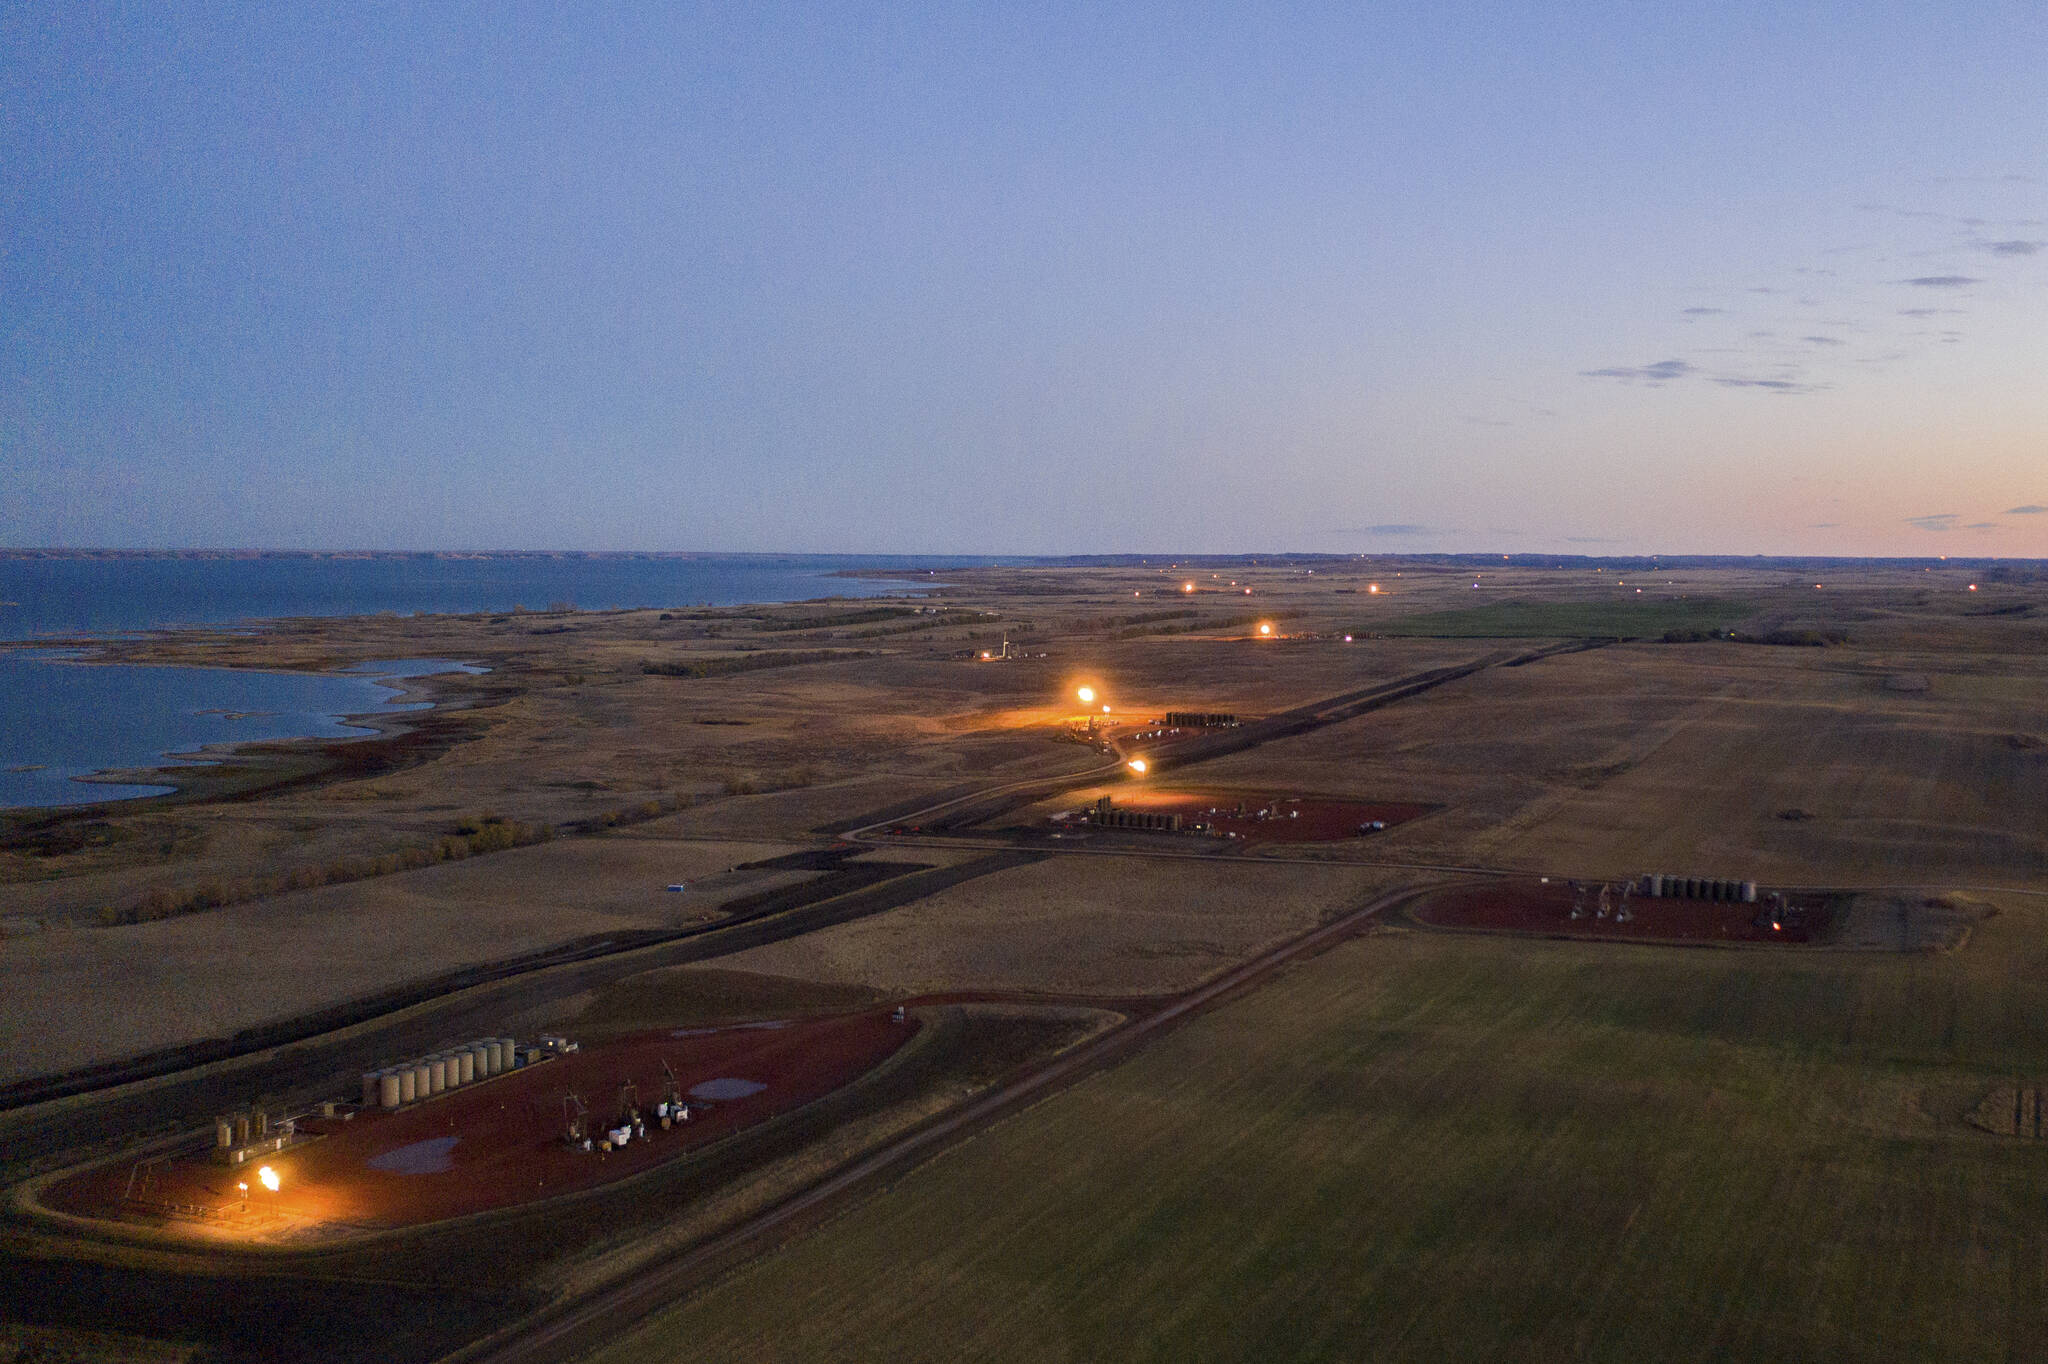 Flares light up the landscape after sunset on the oil patch in the Fort Berthold Indian Reservation in North Dakota on Oct. 27, 2021. Over much of the last decade, oil and gas operators in Texas and a dozen other U.S. states have flared, or burned off, at least 3.5 trillion cubic feet of natural gas, according to an analysis of satellite data by the Howard Center for Investigative Journalism. (Isaac Stone Simonelli / Howard Center for Investigative Journalism)